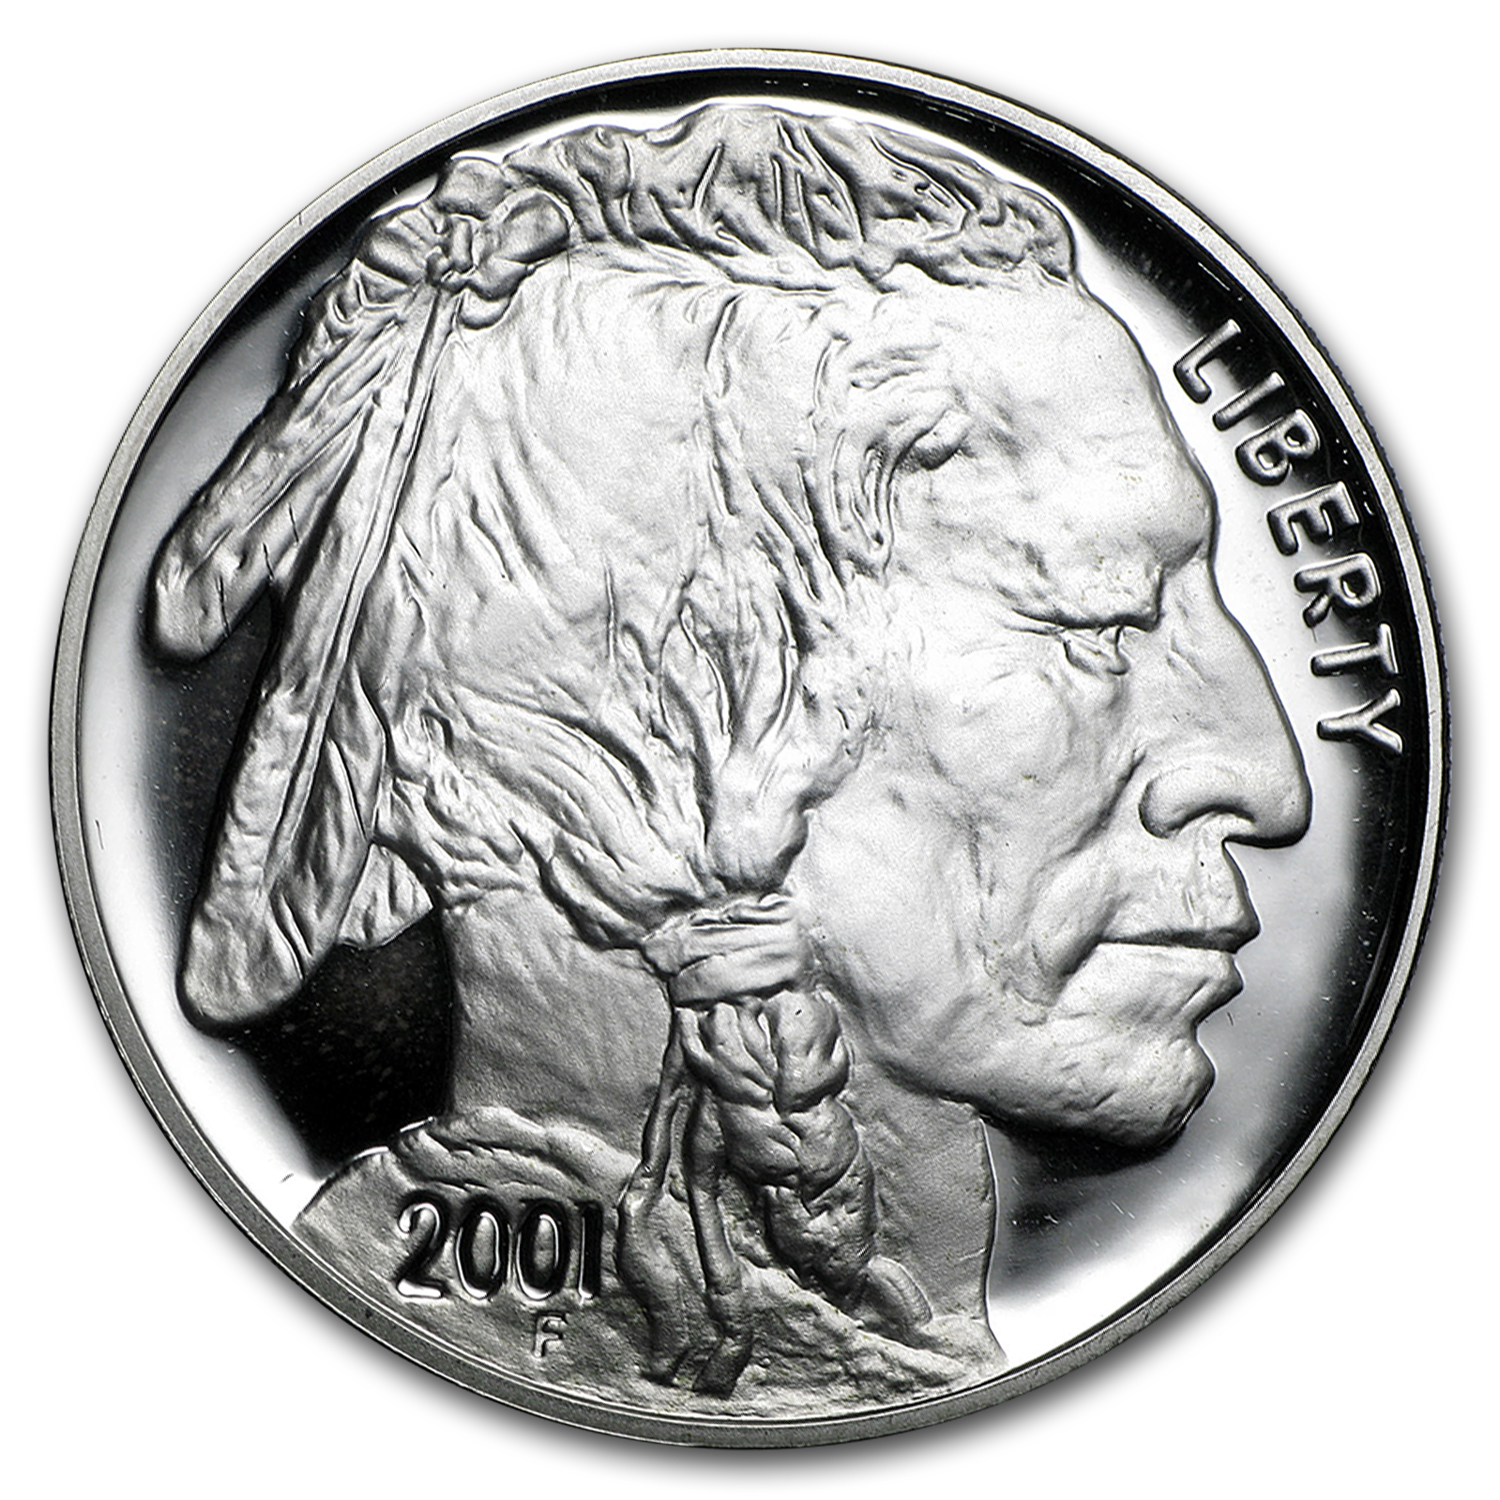 Buy 2001-P Buffalo $1 Silver Commem Proof (Capsule only)